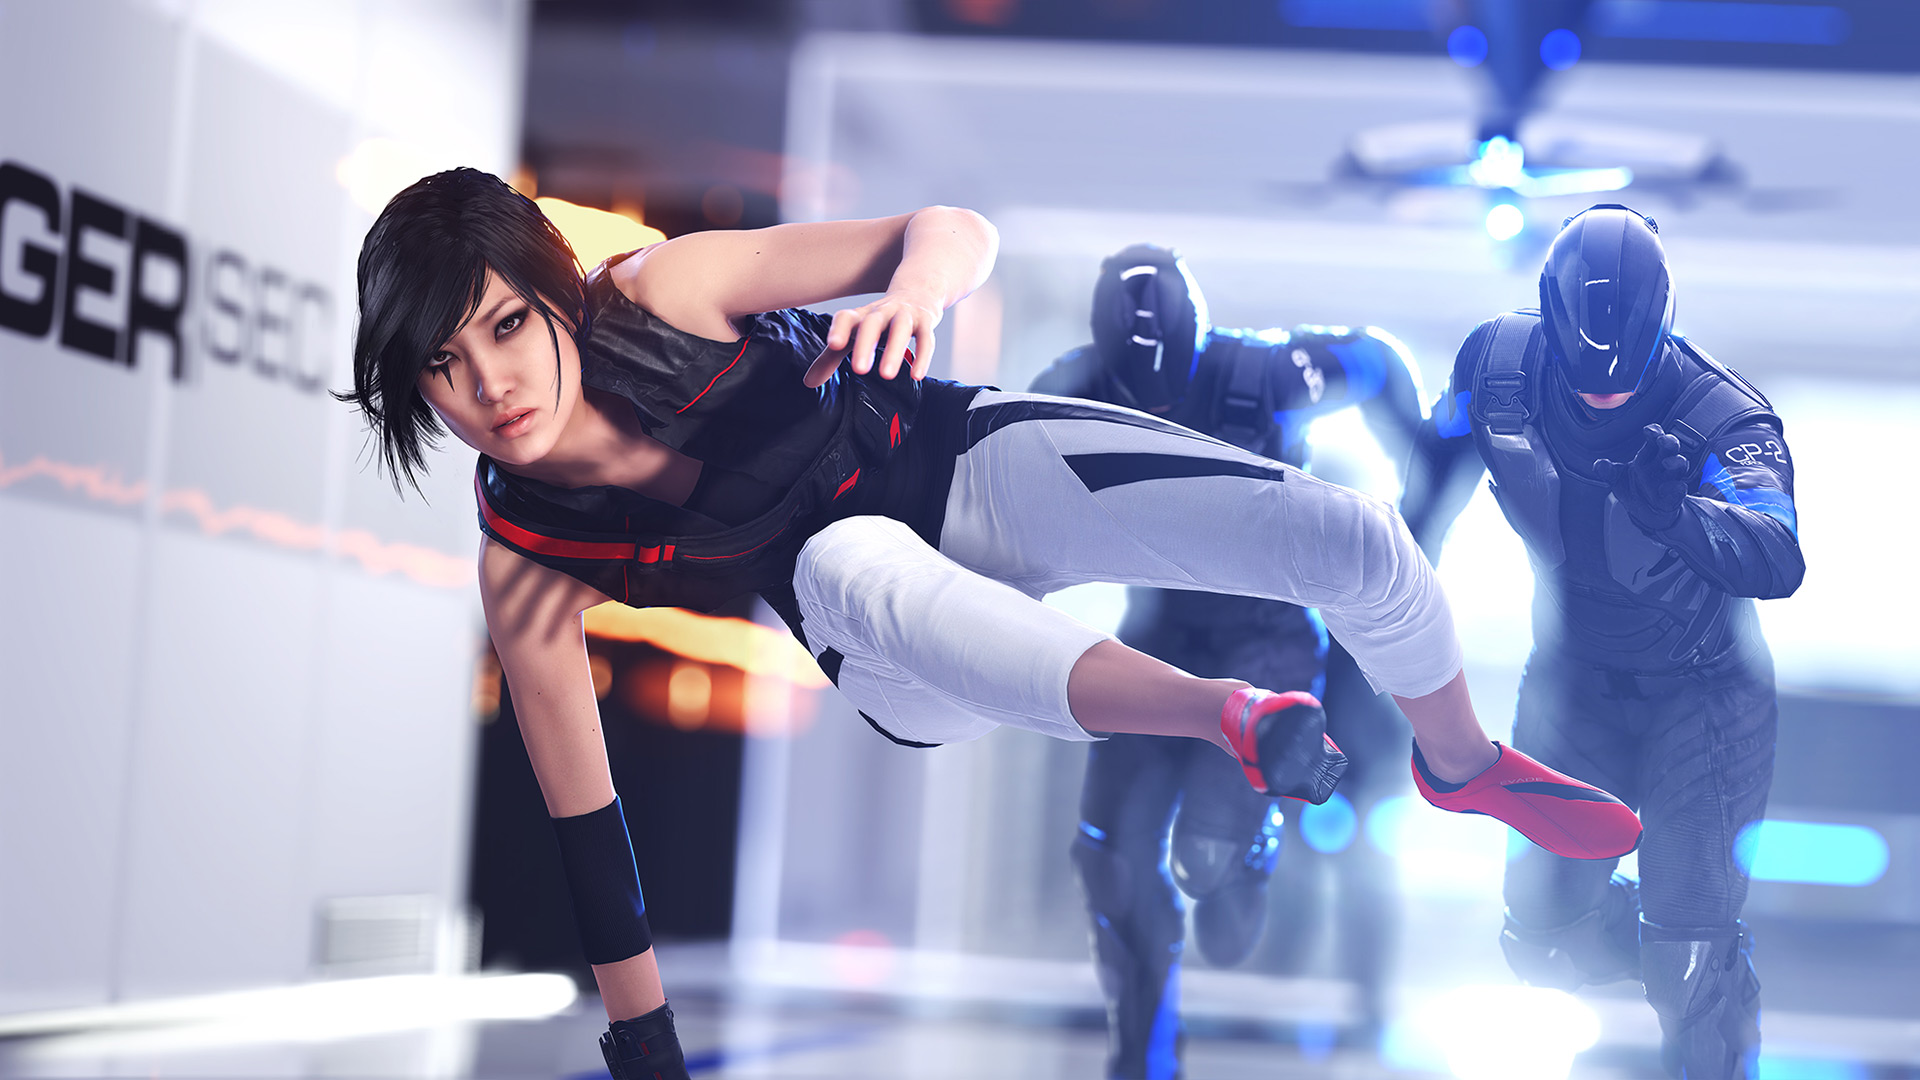 “Mirror’s Edge Catalyst” Delayed Once More - Delayed Into June